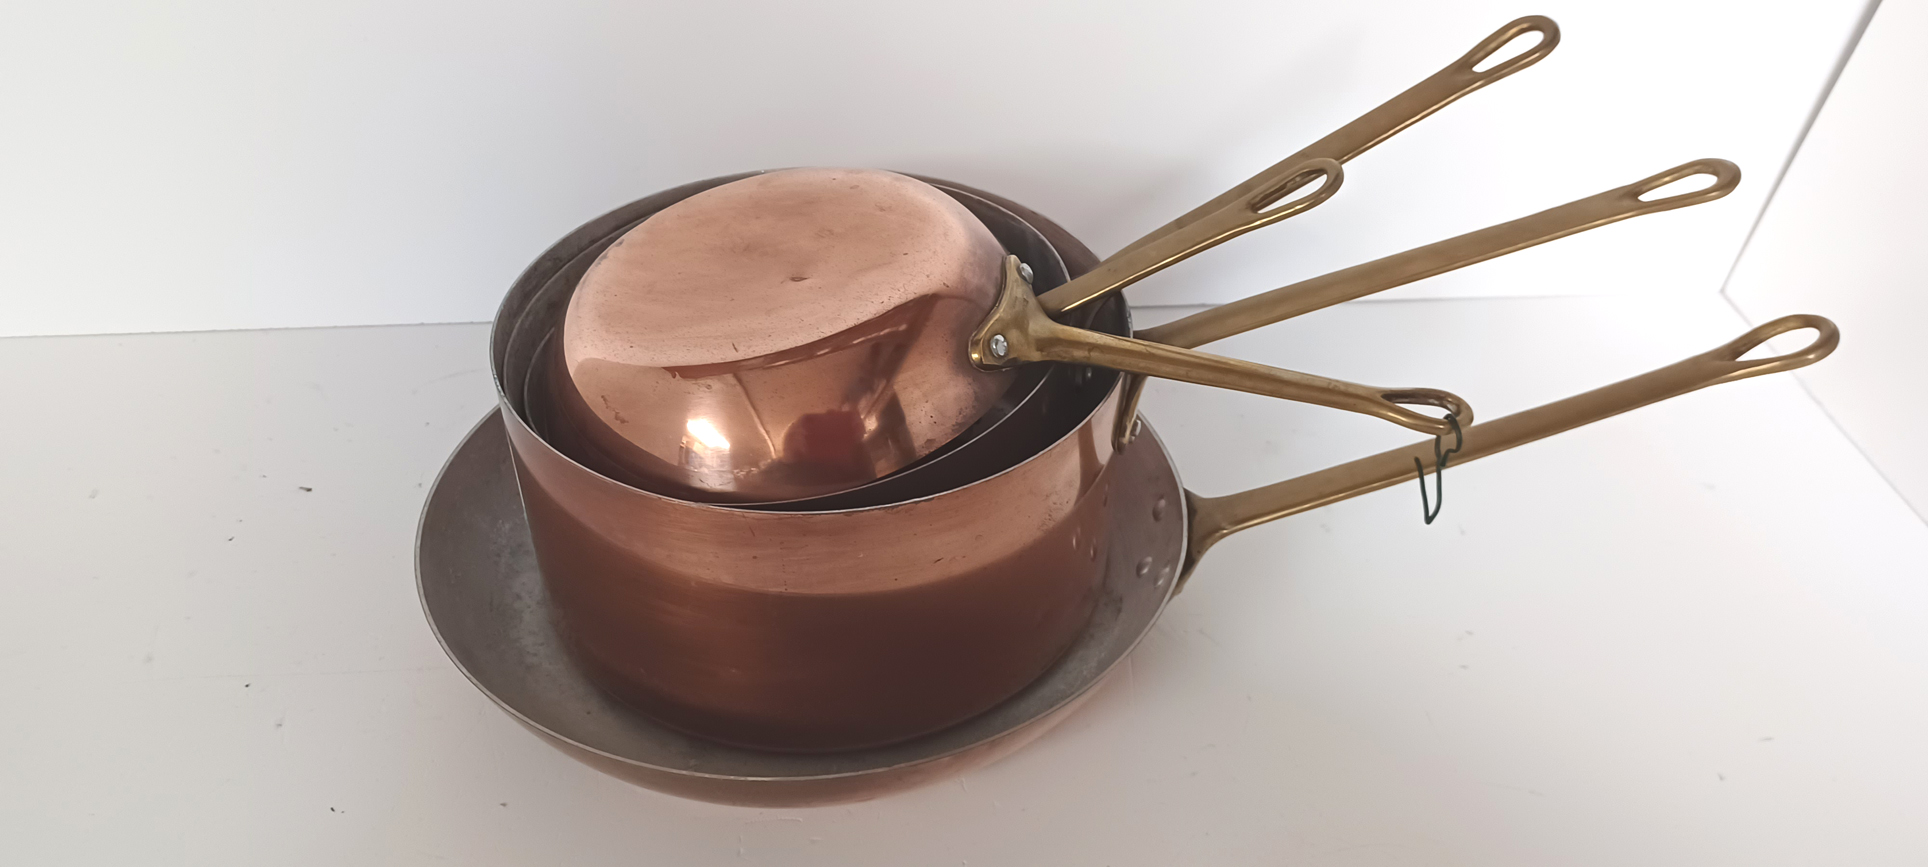 5 FRENCH LINED COPPER PANS - Image 4 of 4